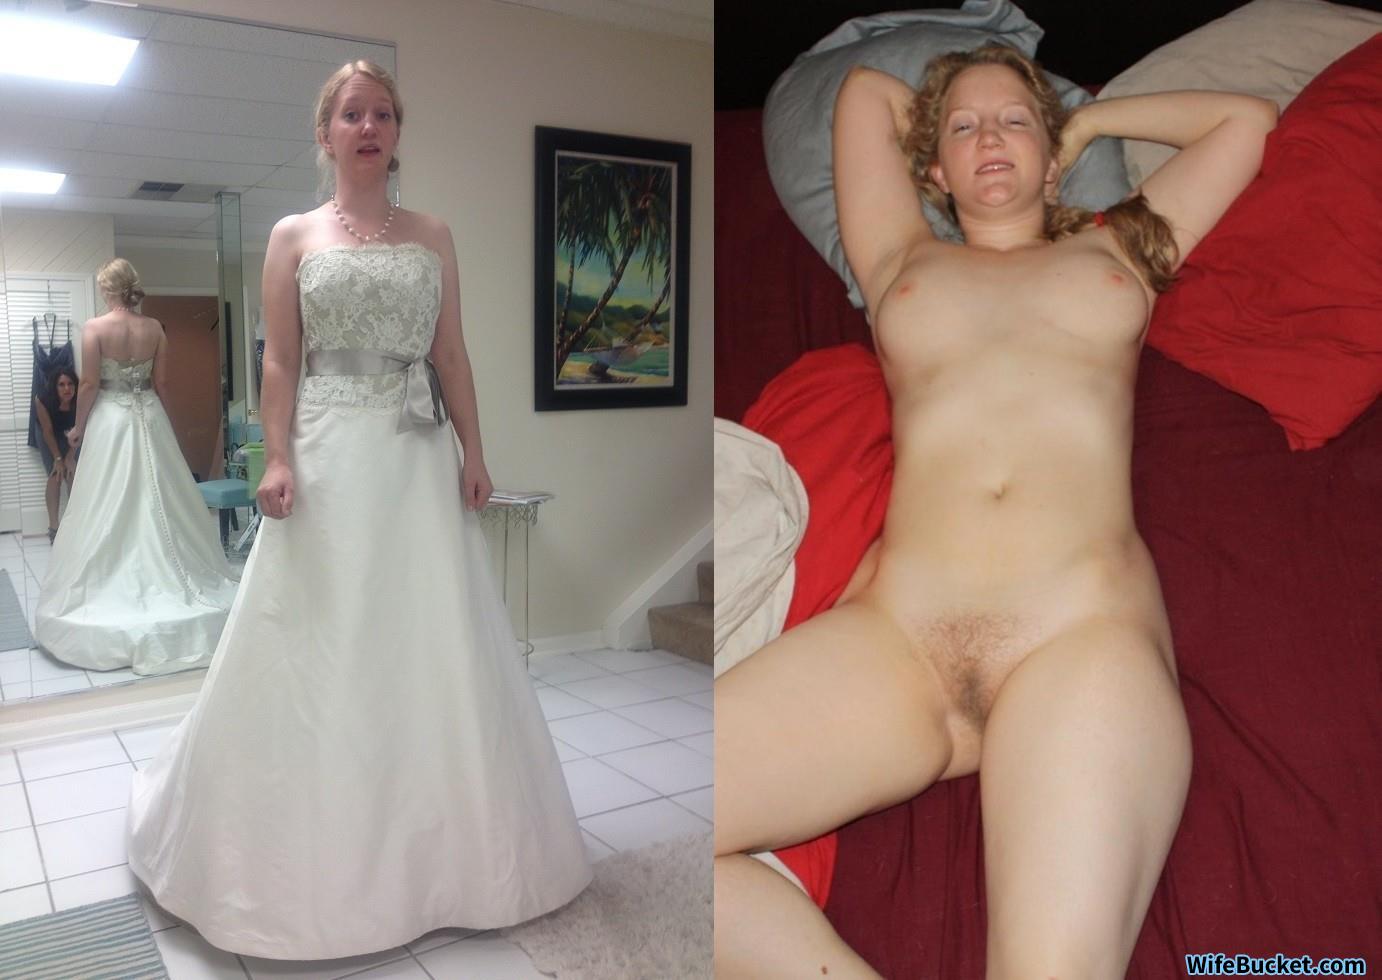 Before After Nudes Of Sexy Amateur Brides Some Home Porn Too Wifebucket Offical Milf Blog